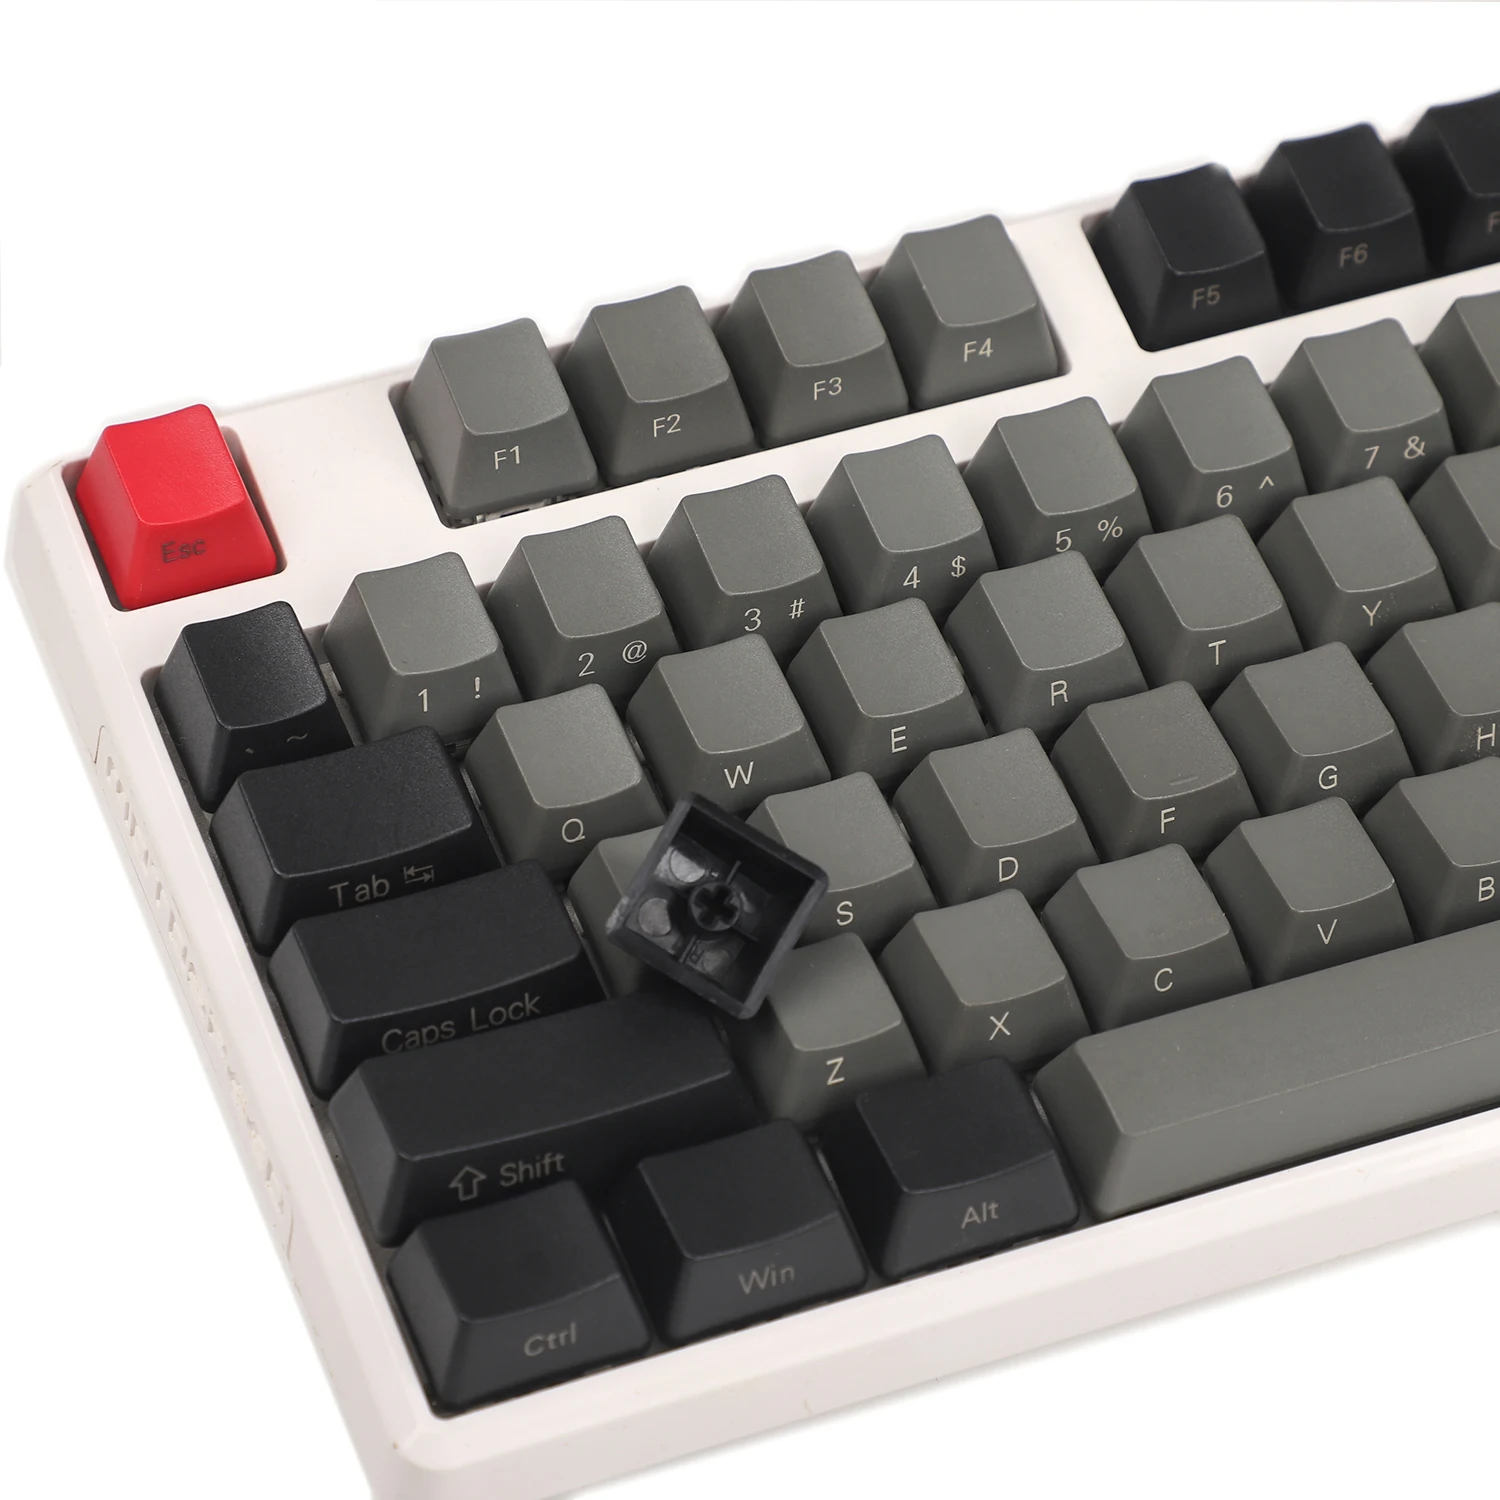 YMDK Thick PBT Dolch OEM Profile Russian Keycap Keyset Suitable For Steelseries 6GV2 7G 1 - Pudding Keycap